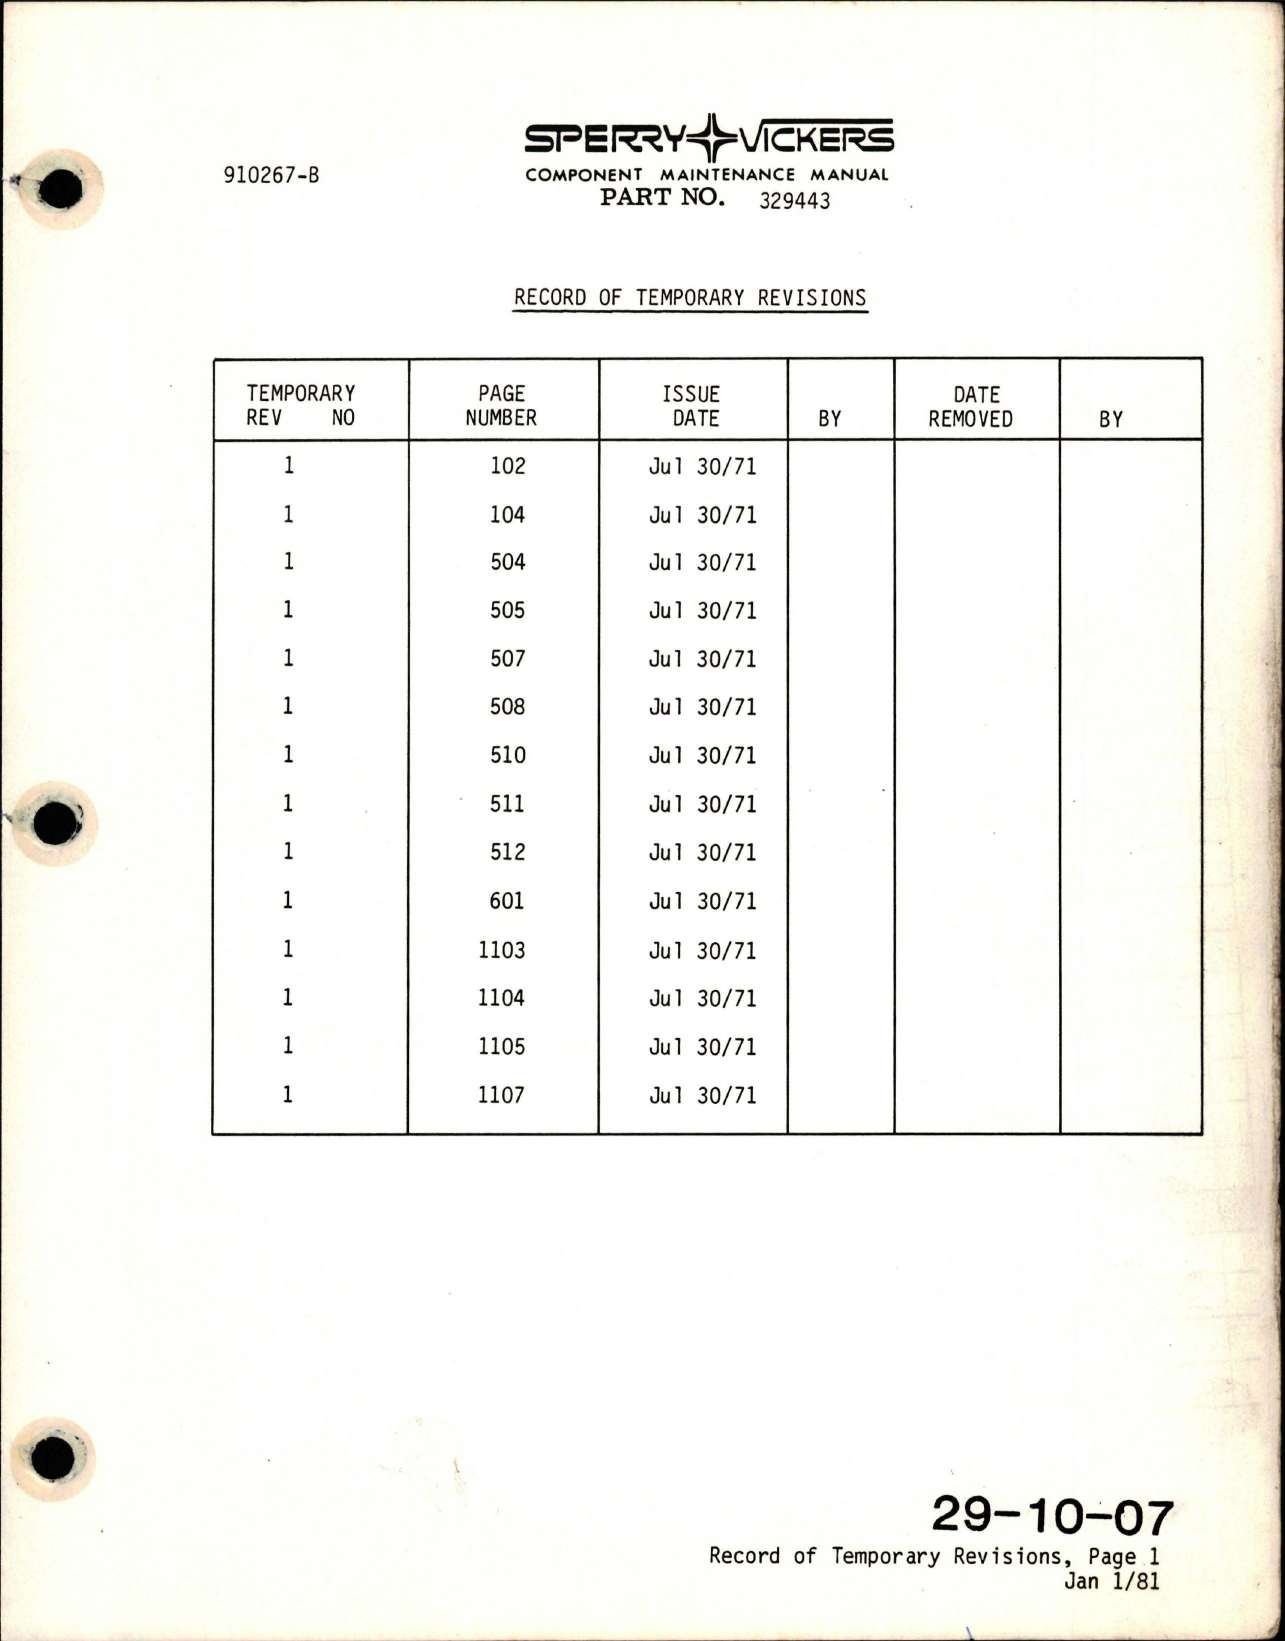 Sample page 7 from AirCorps Library document: Maintenance with Illustrated Parts List for Electric Motor Subassembly for Hydraulic Motorpump - Model MPEV3-022-5 - Part 329443 